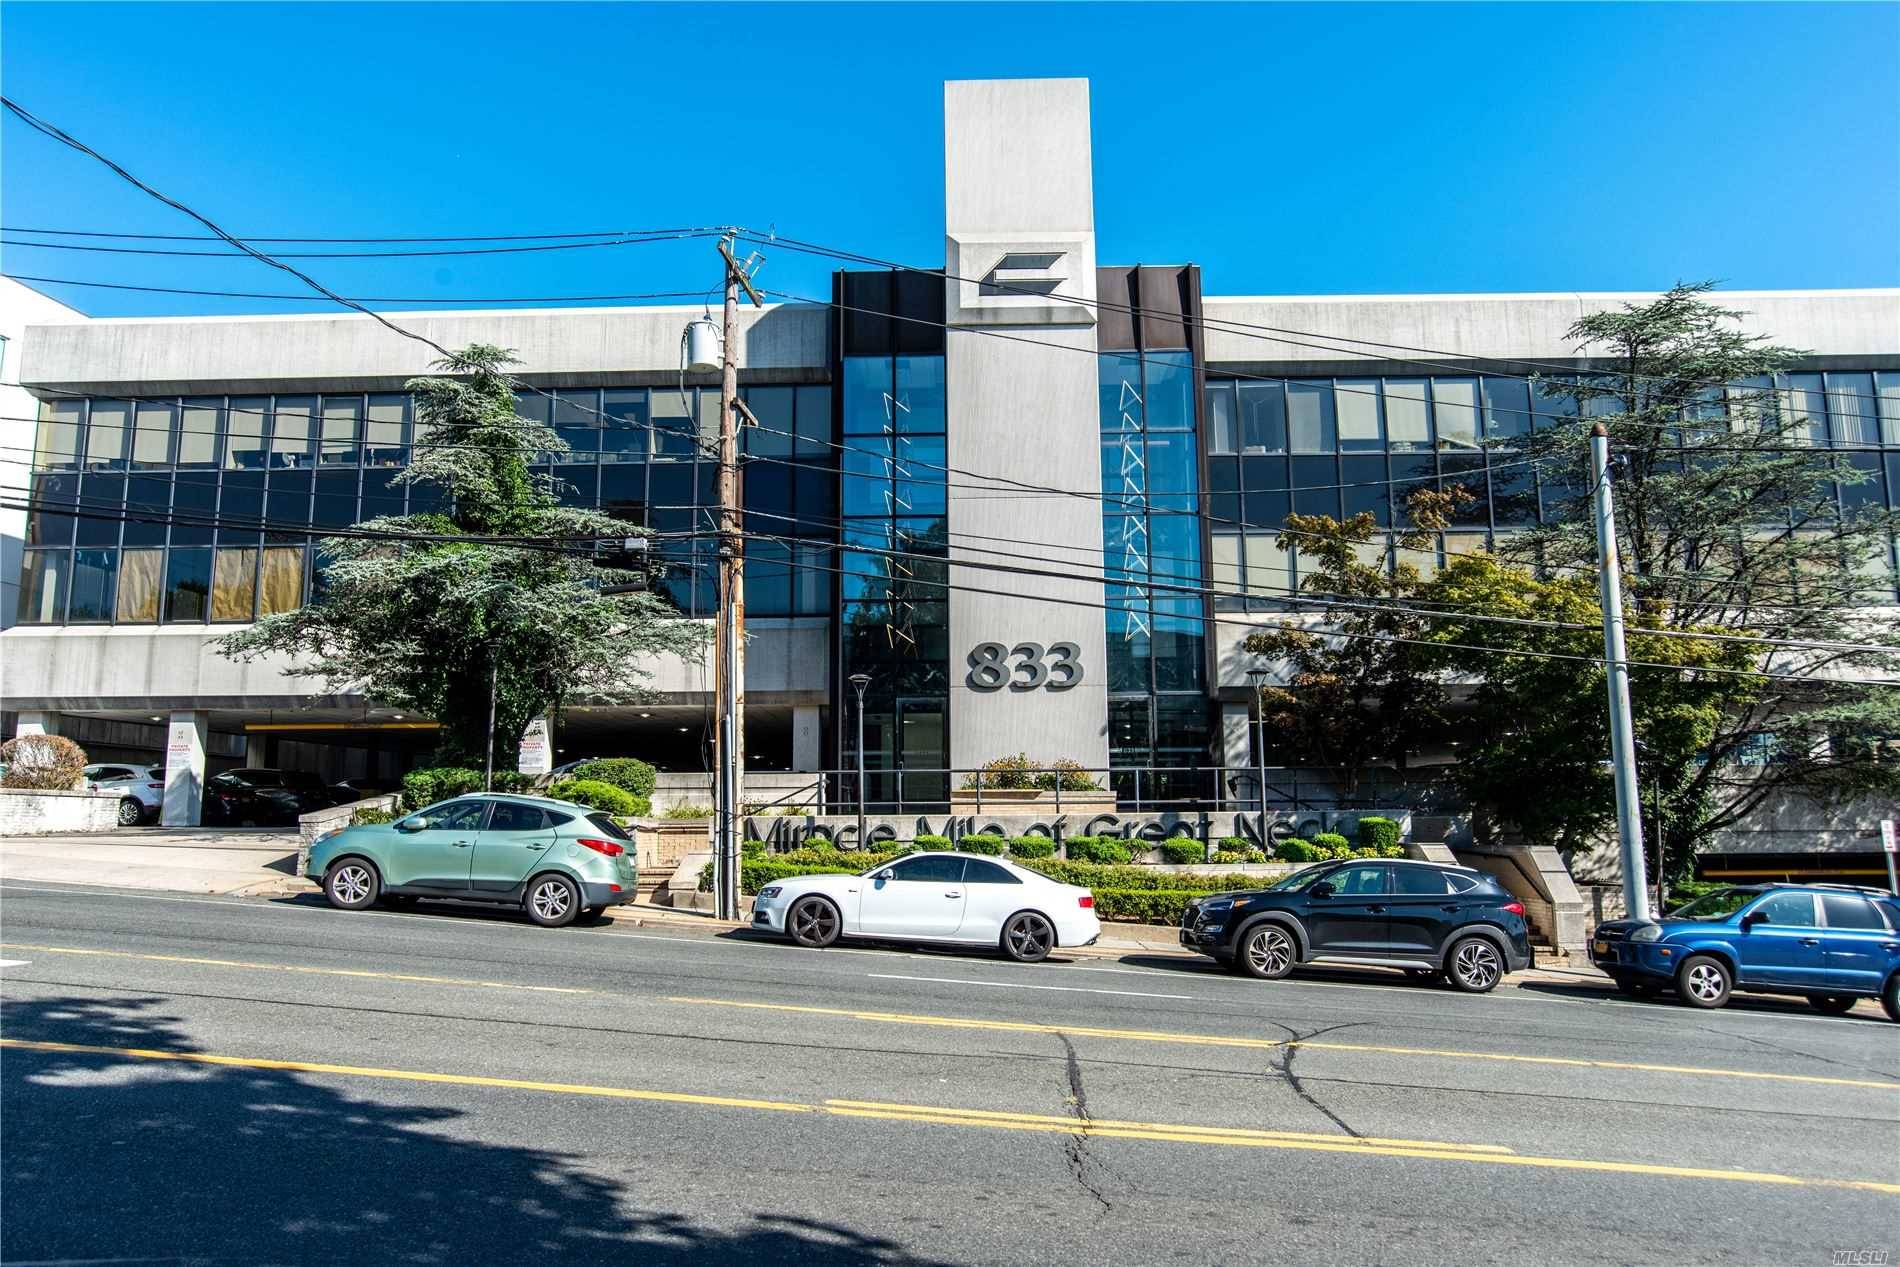 Two medical office suites available in 833 NOBO, a professional medical building situated on the Miracle Mile nearby several tier 1 medical groups.